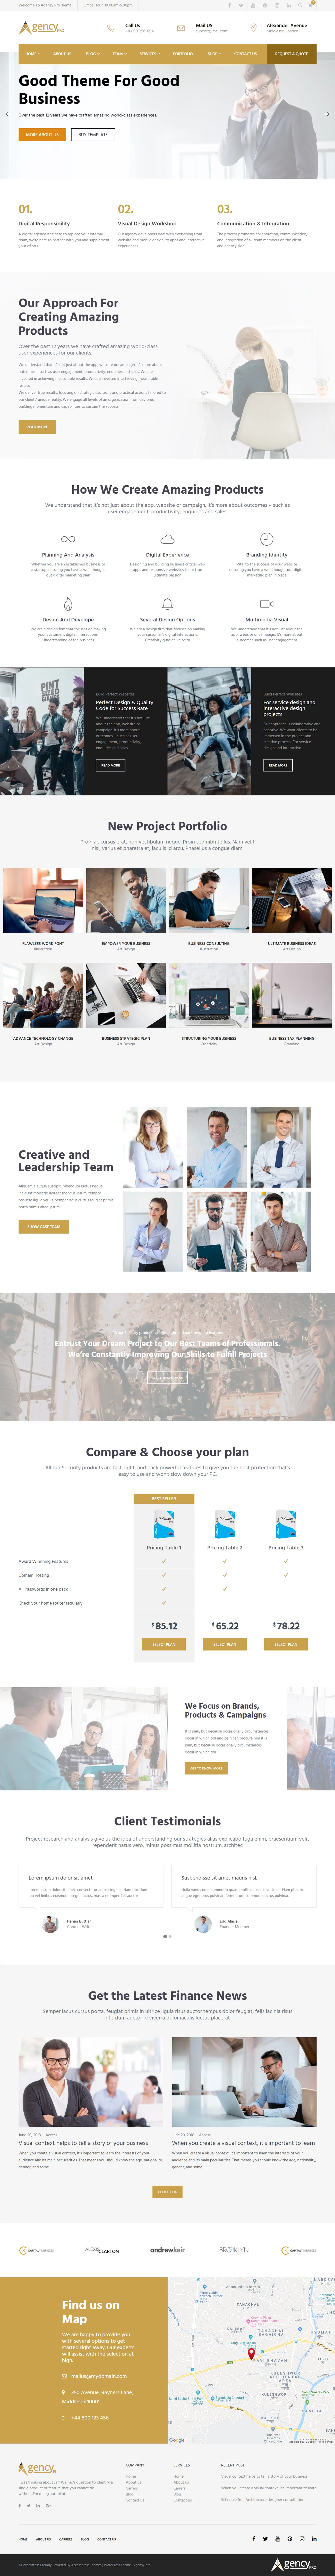 Agency Pro - Premium Agency WordPress Themes and Templates